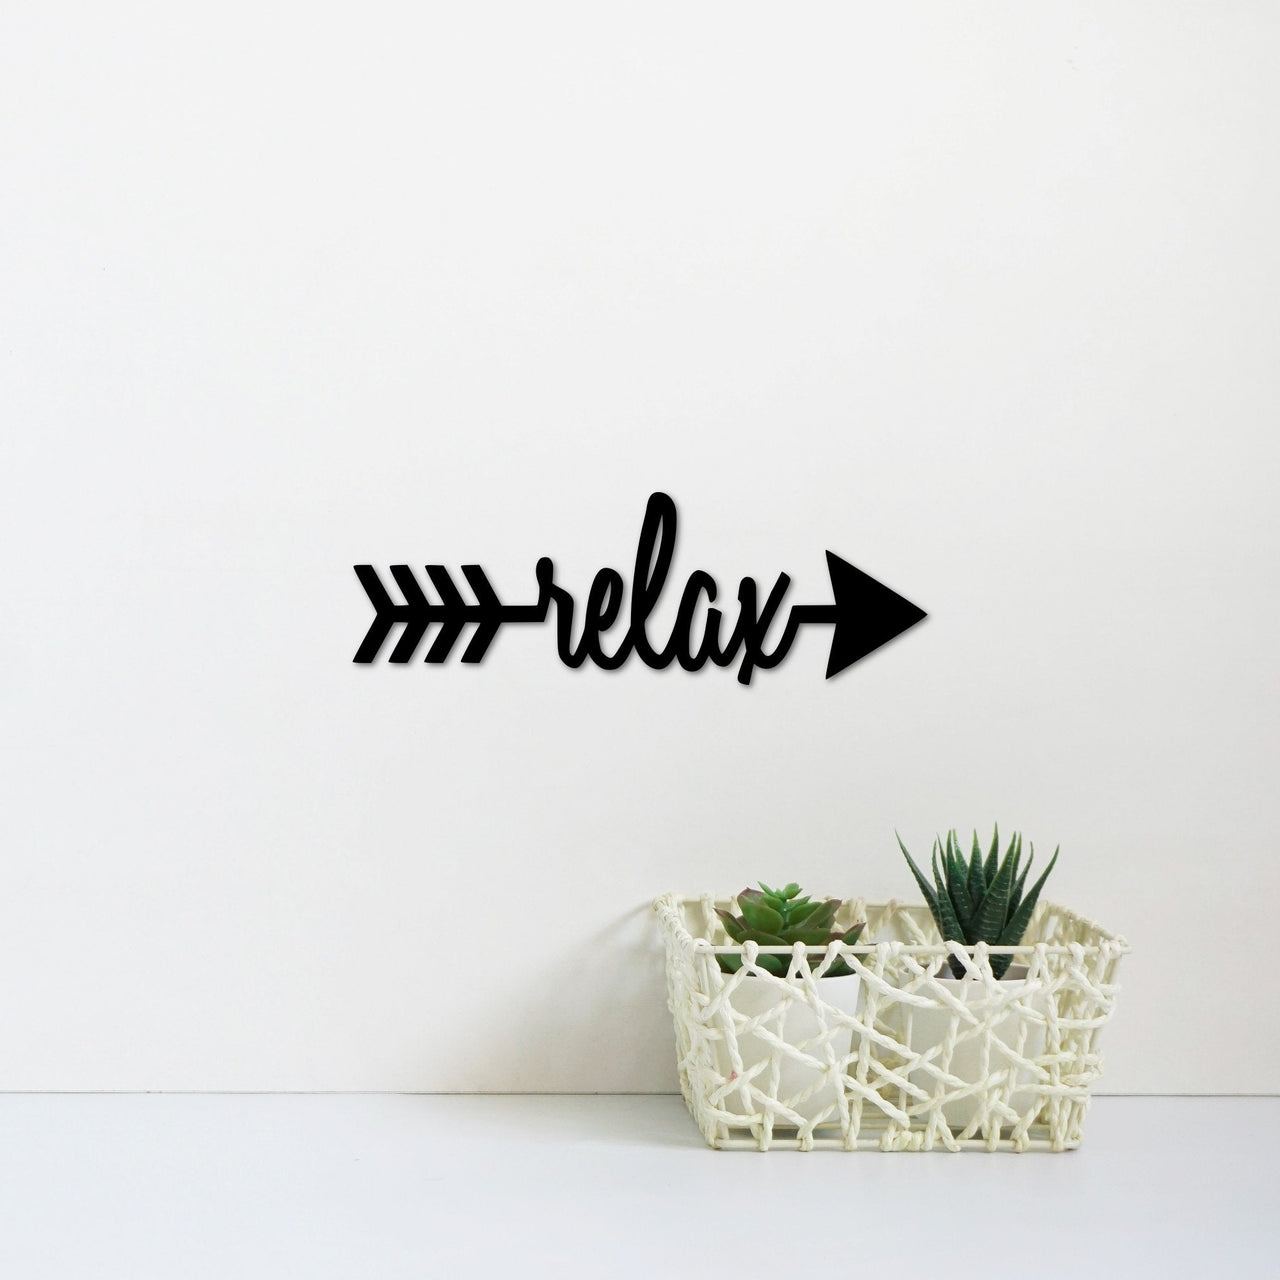 Relax Arrow Metal Wall Art | Master Bathroom Decor | Arrow with Relax Word for the Wall | Unwind Beach, Cabin or Lake House Relax Sign